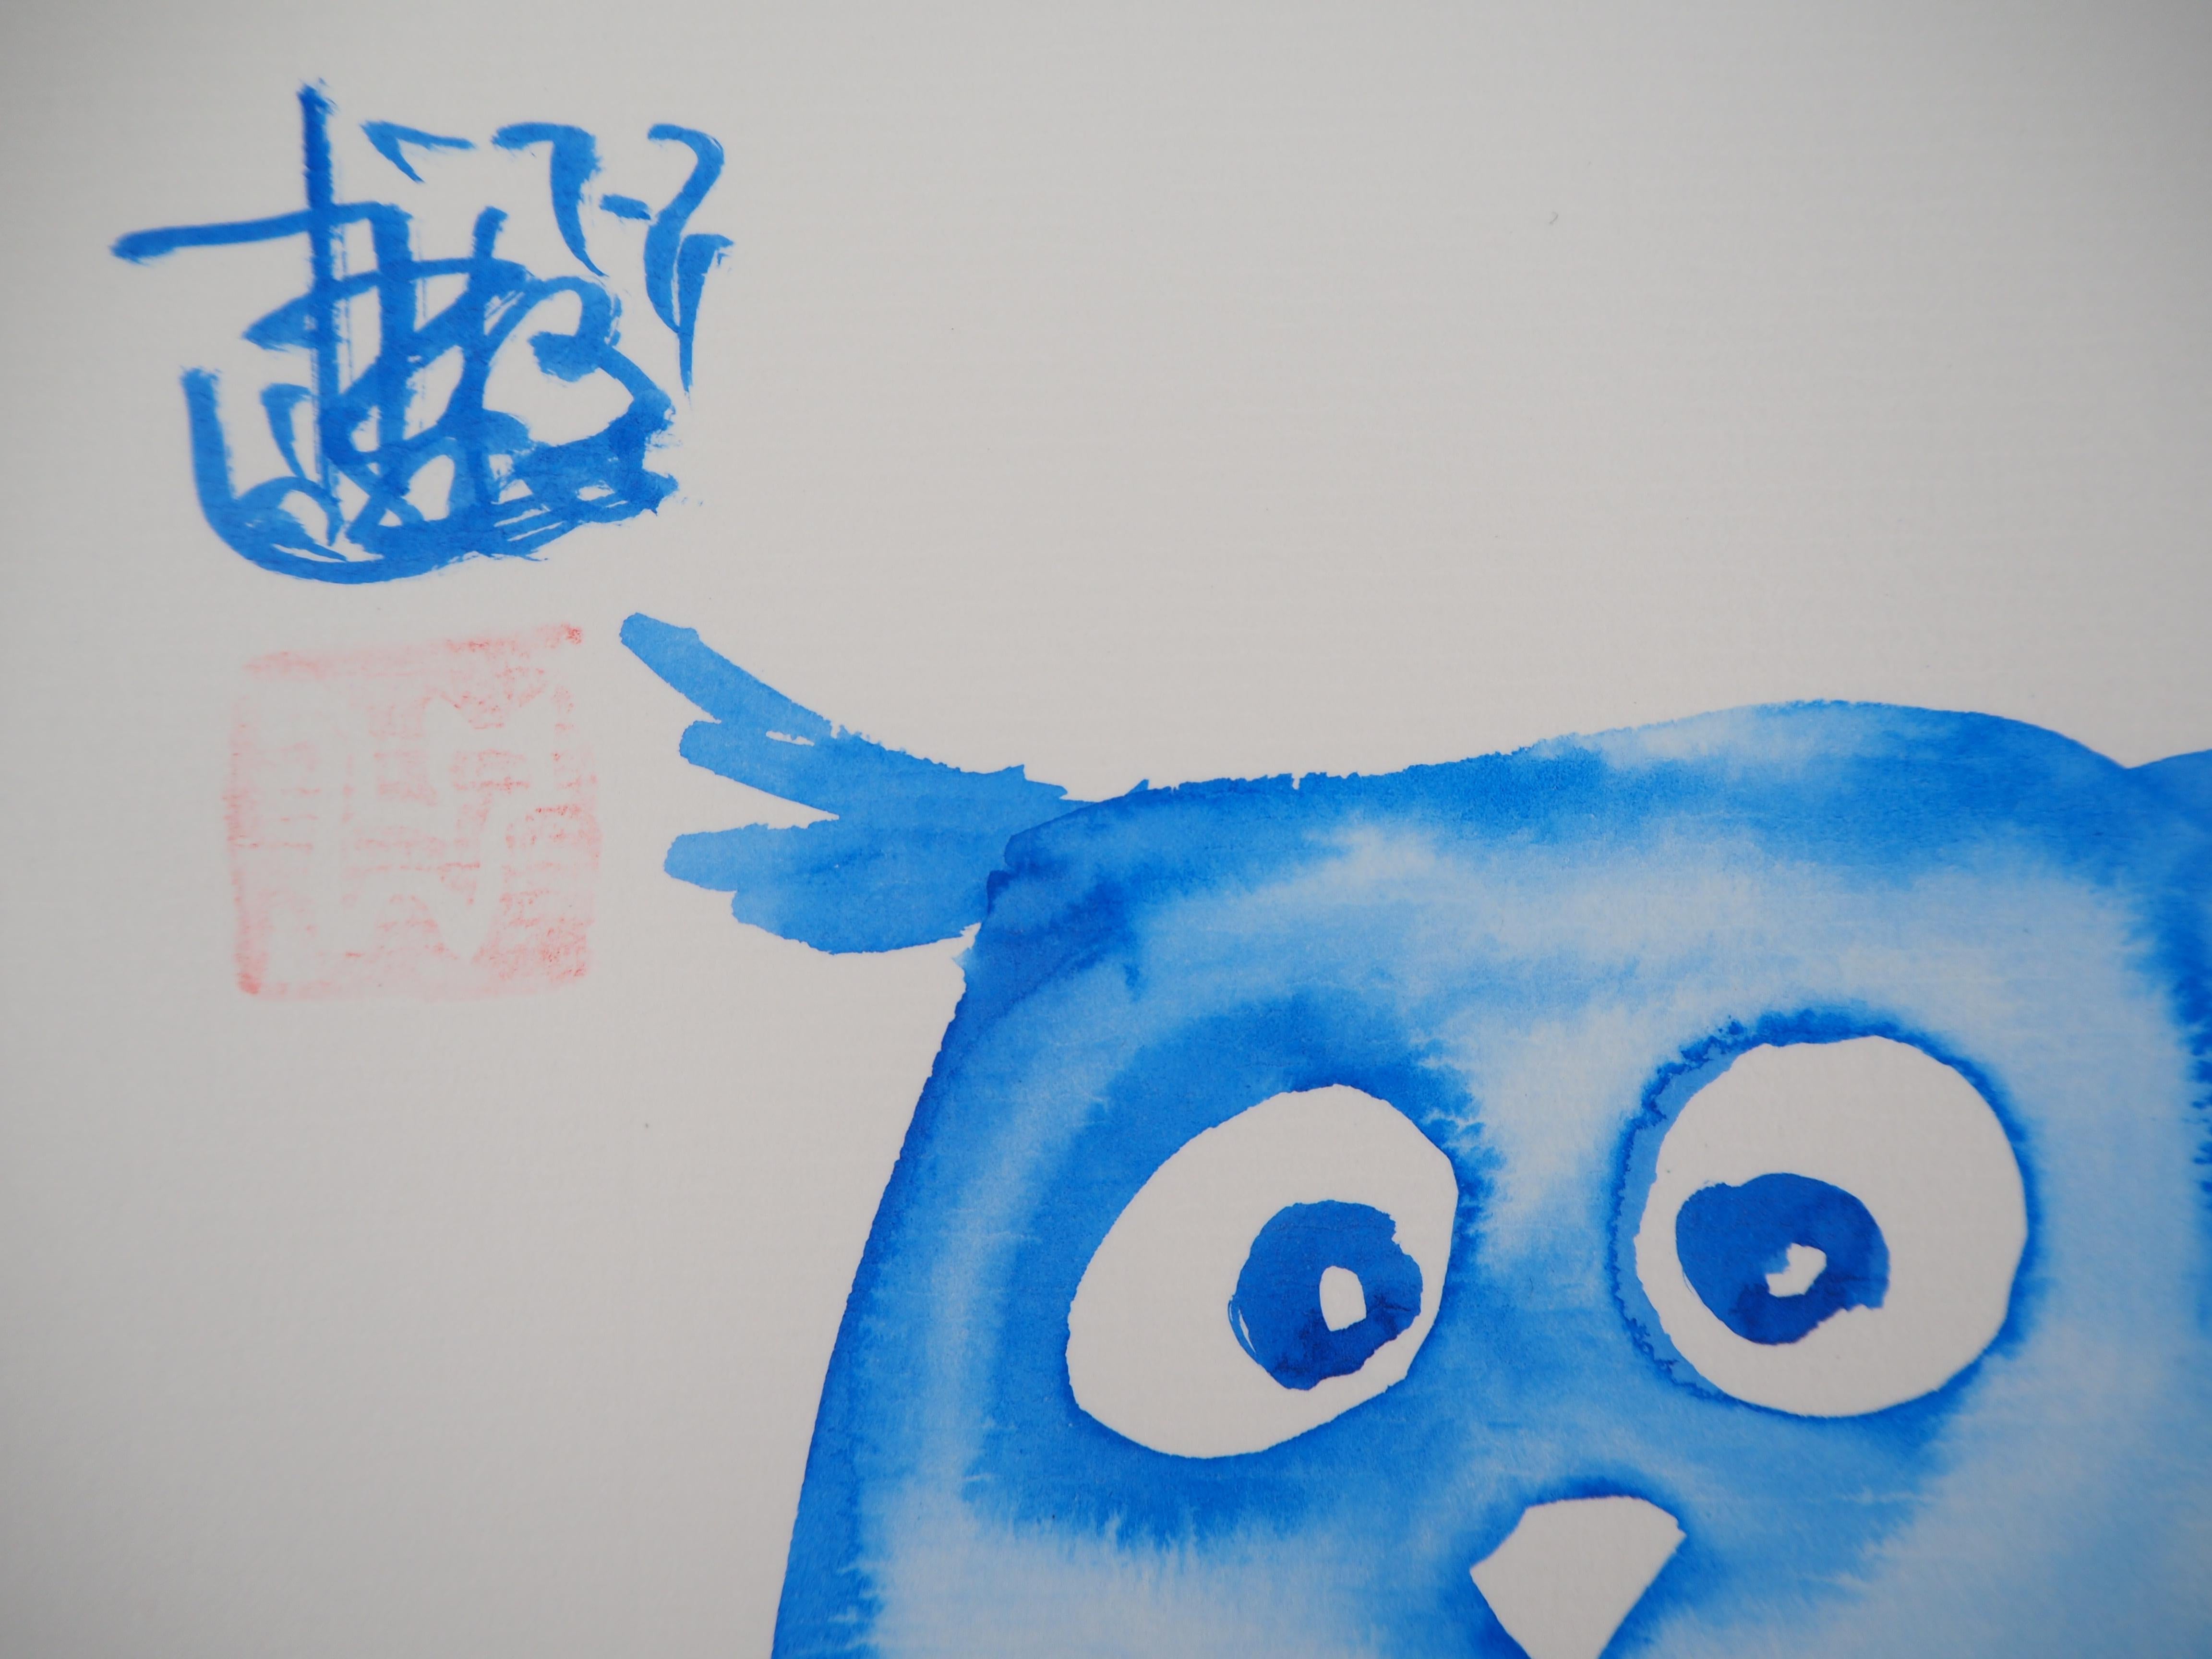 Blue Owl and her Mouse - Handsigned Original Ink Drawing  - Art by Laszlo Tibay